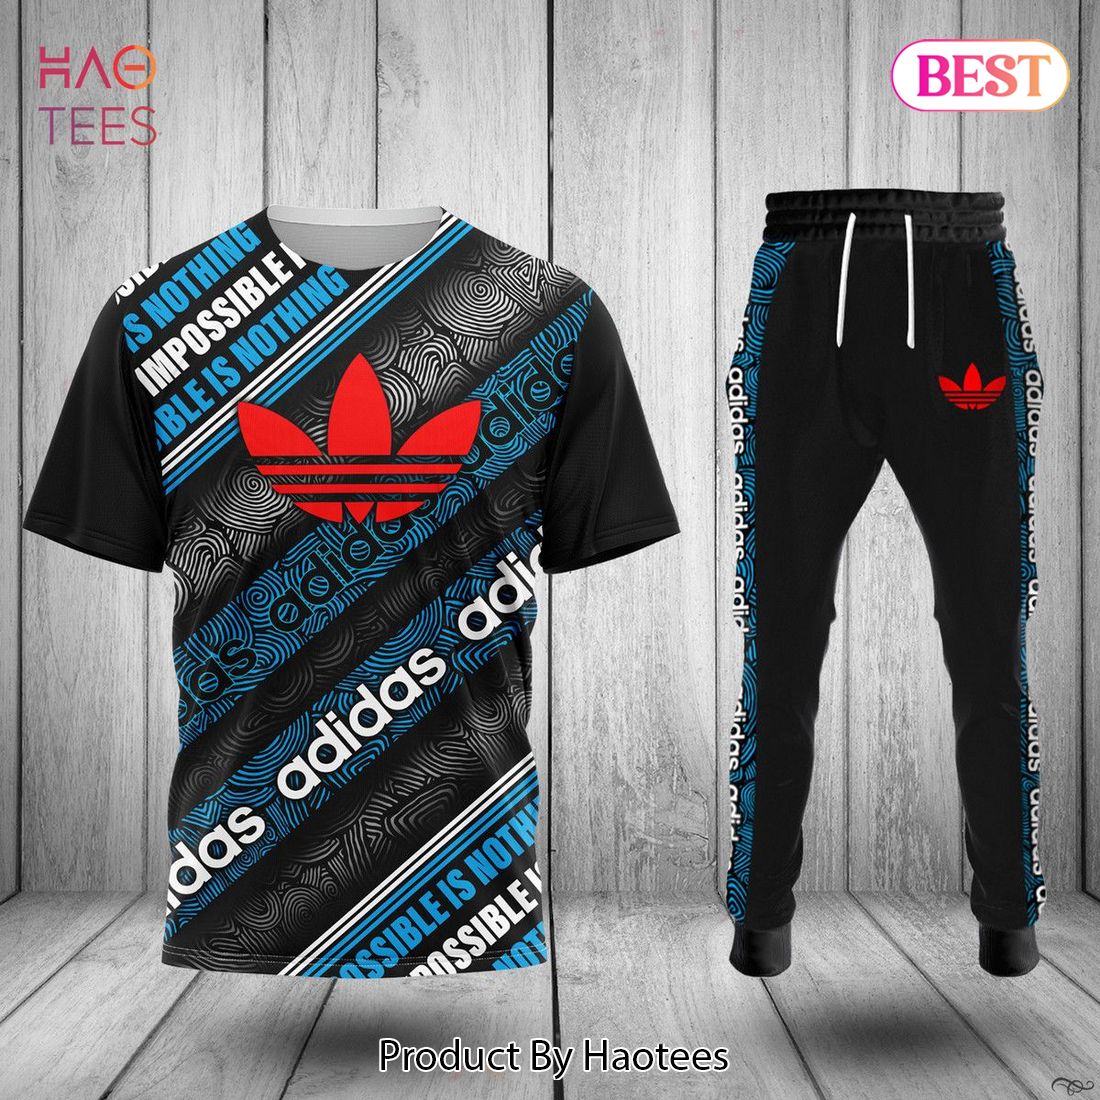 BEST Adidas Blue Black Mix Red Logo Luxury Brand T-Shirt And Pants Limited Edition